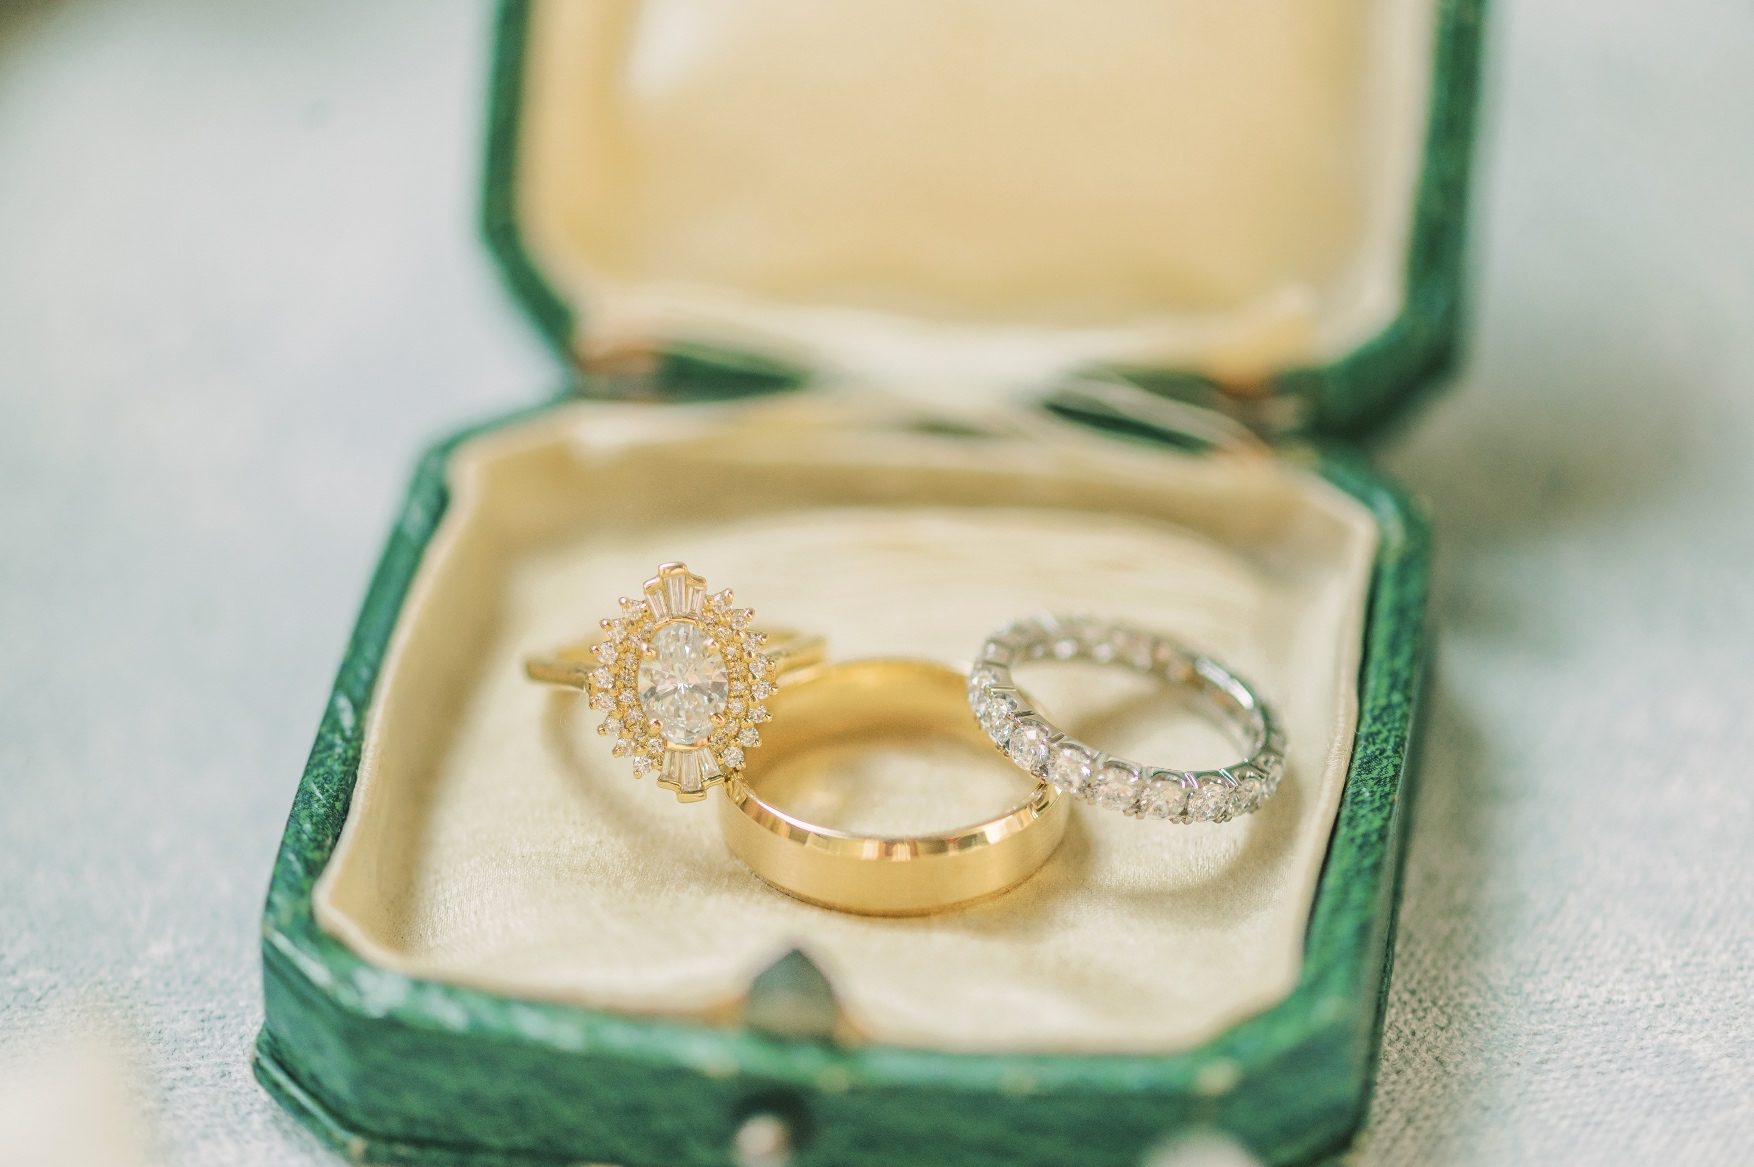 A close up of the wedding ring and wedding bands in a green decorative jewelry box